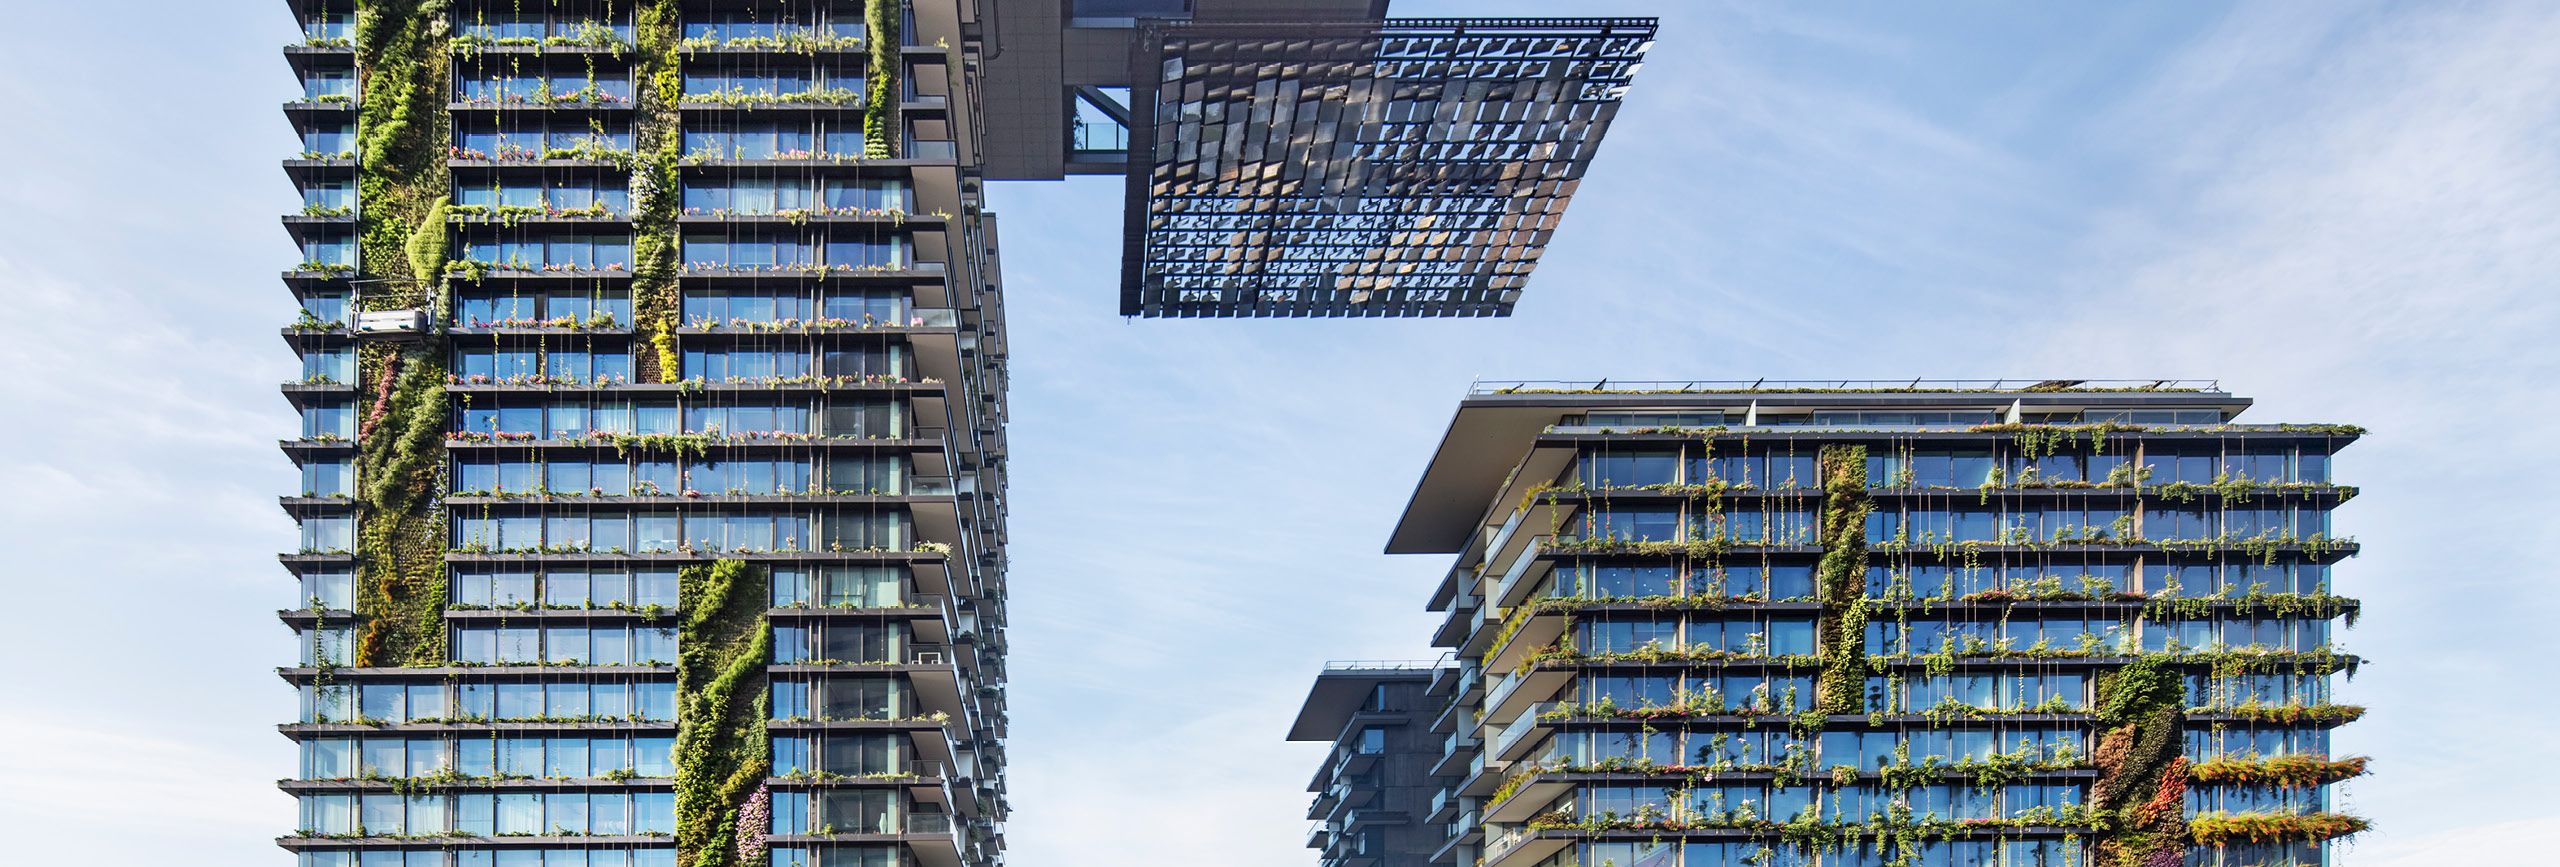 Apartment building with living green walls and solar panels